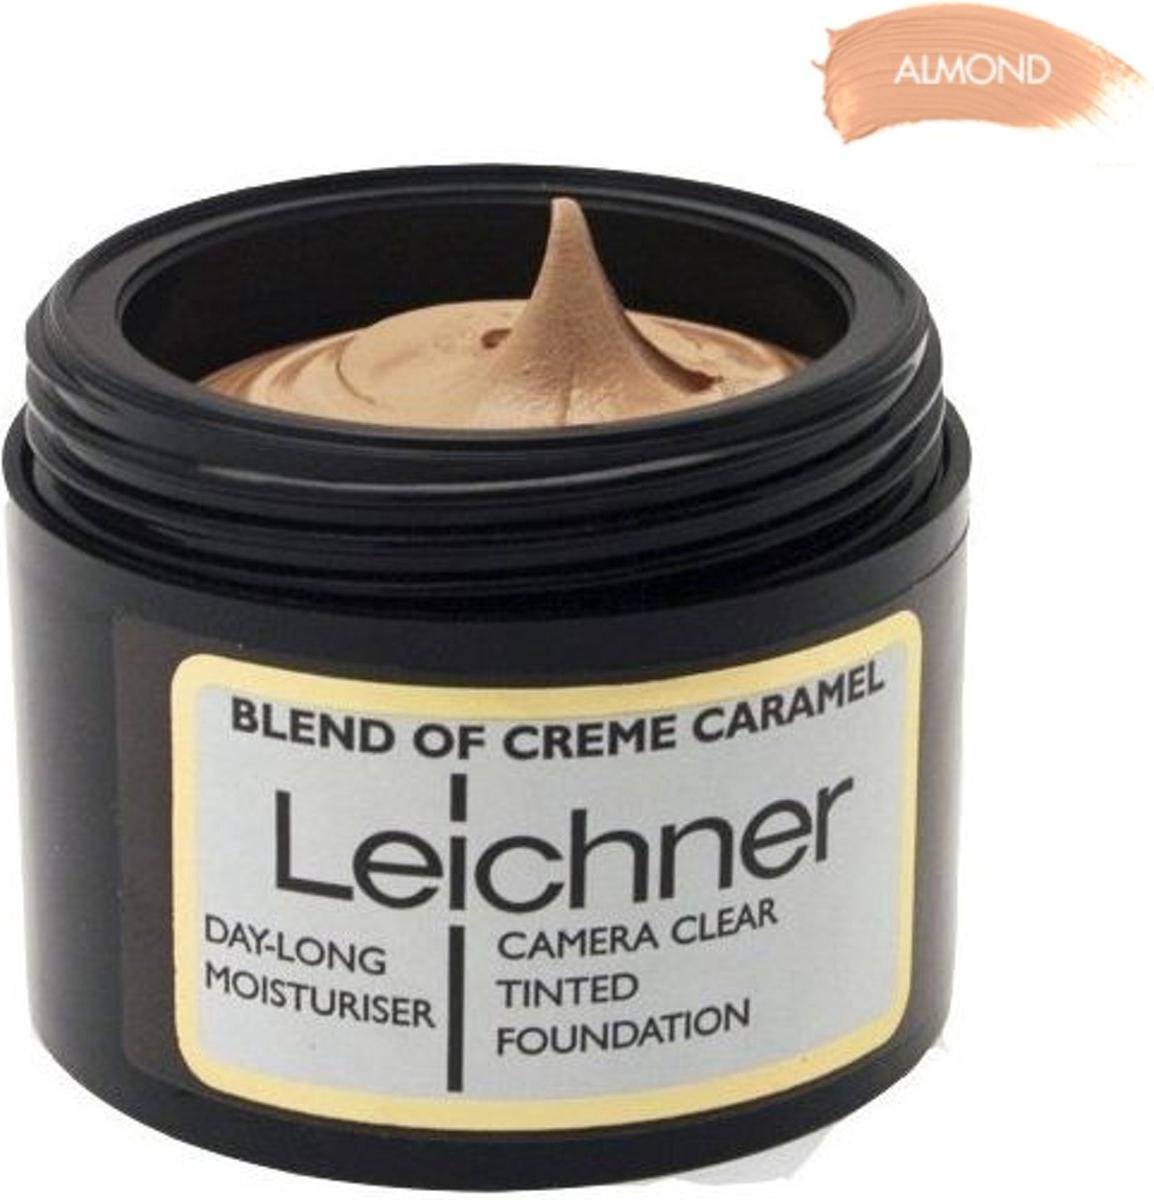 Leichner Camera Clear Tinted Foundation 30ml Blend Of Almond